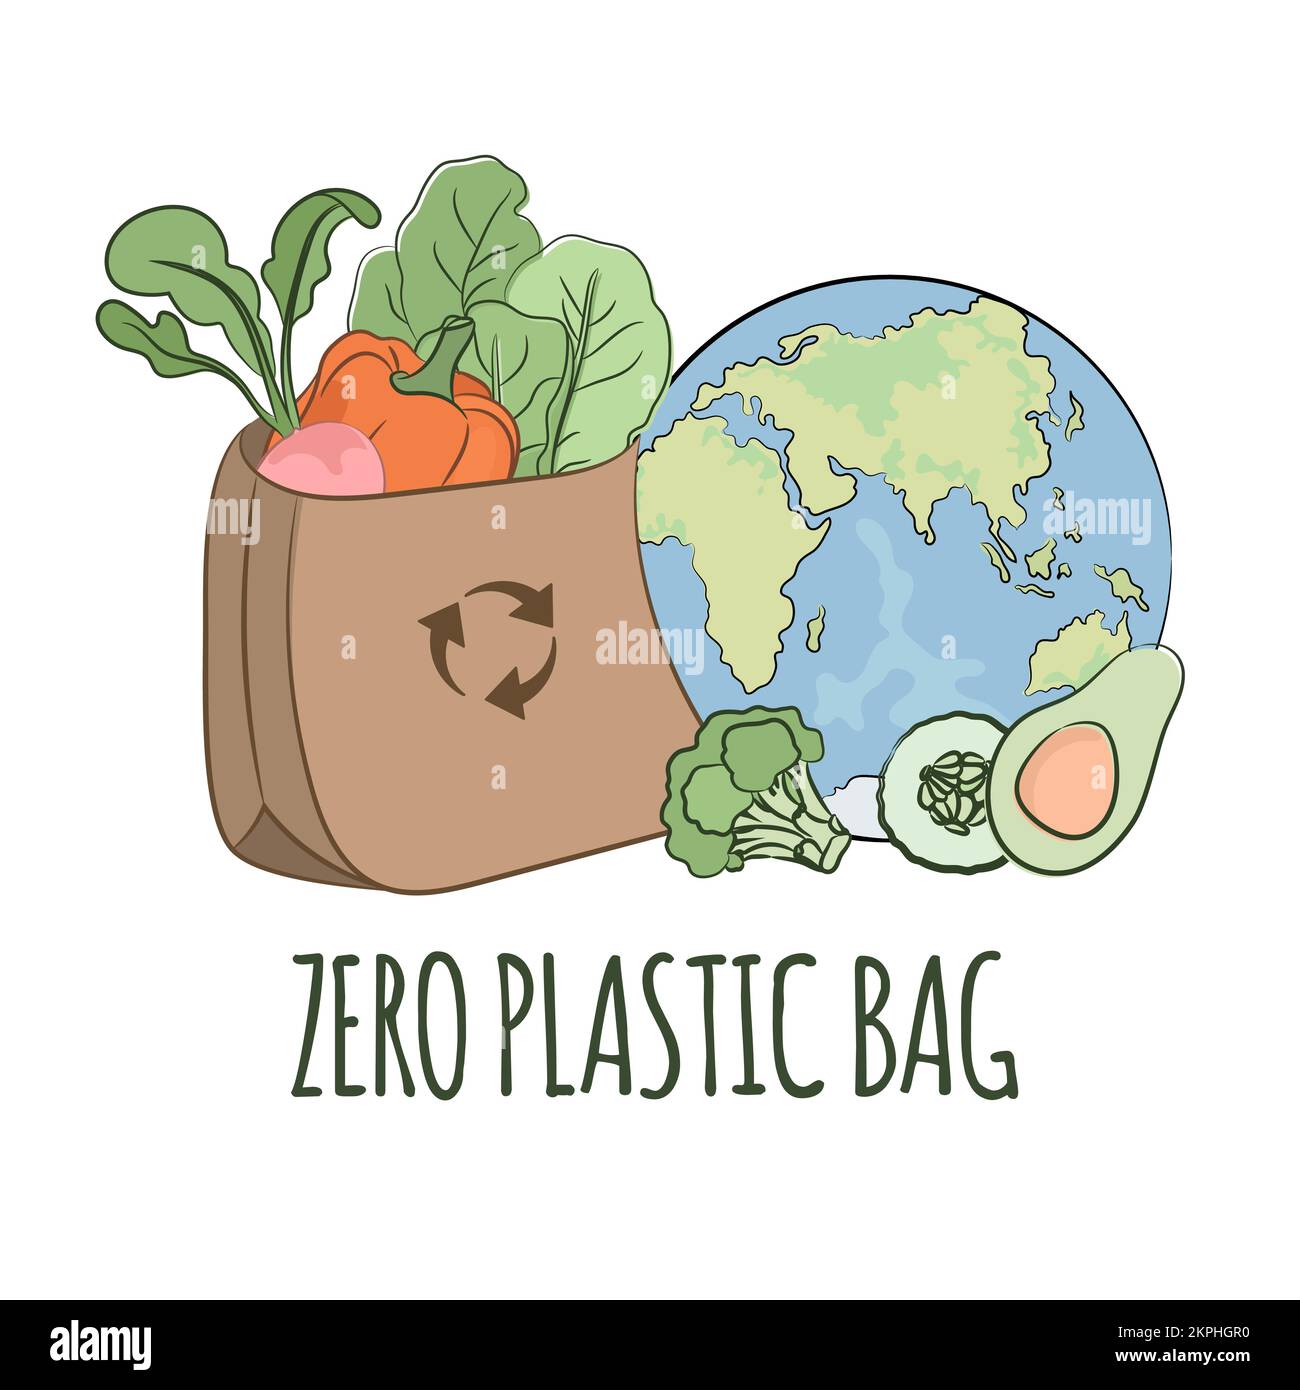 RECYCLING USE Waste Problem Humanity Use Of Natural Materials Paper Bag With Vegetables And Earth Globe Banner Clip Art Vector Illustration Set For Pr Stock Vector